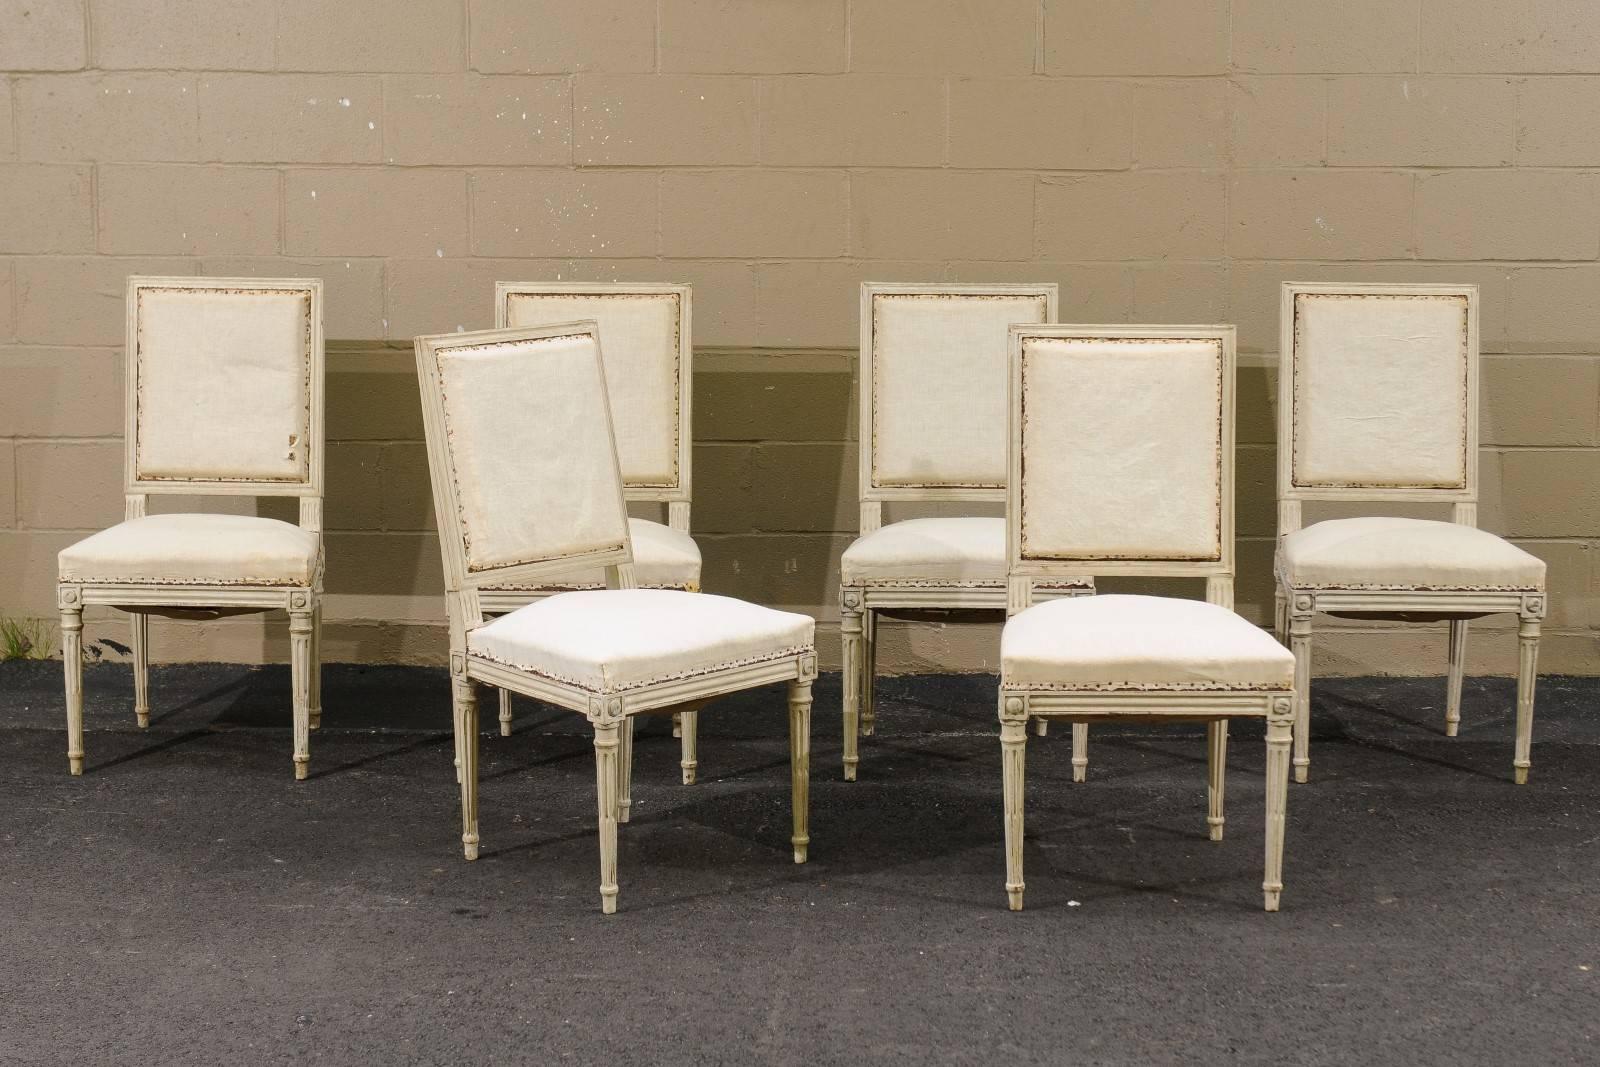 20th Century Set of Six Louis XVI Swedish Style Dining Room Upholstered Chairs from the 1900s